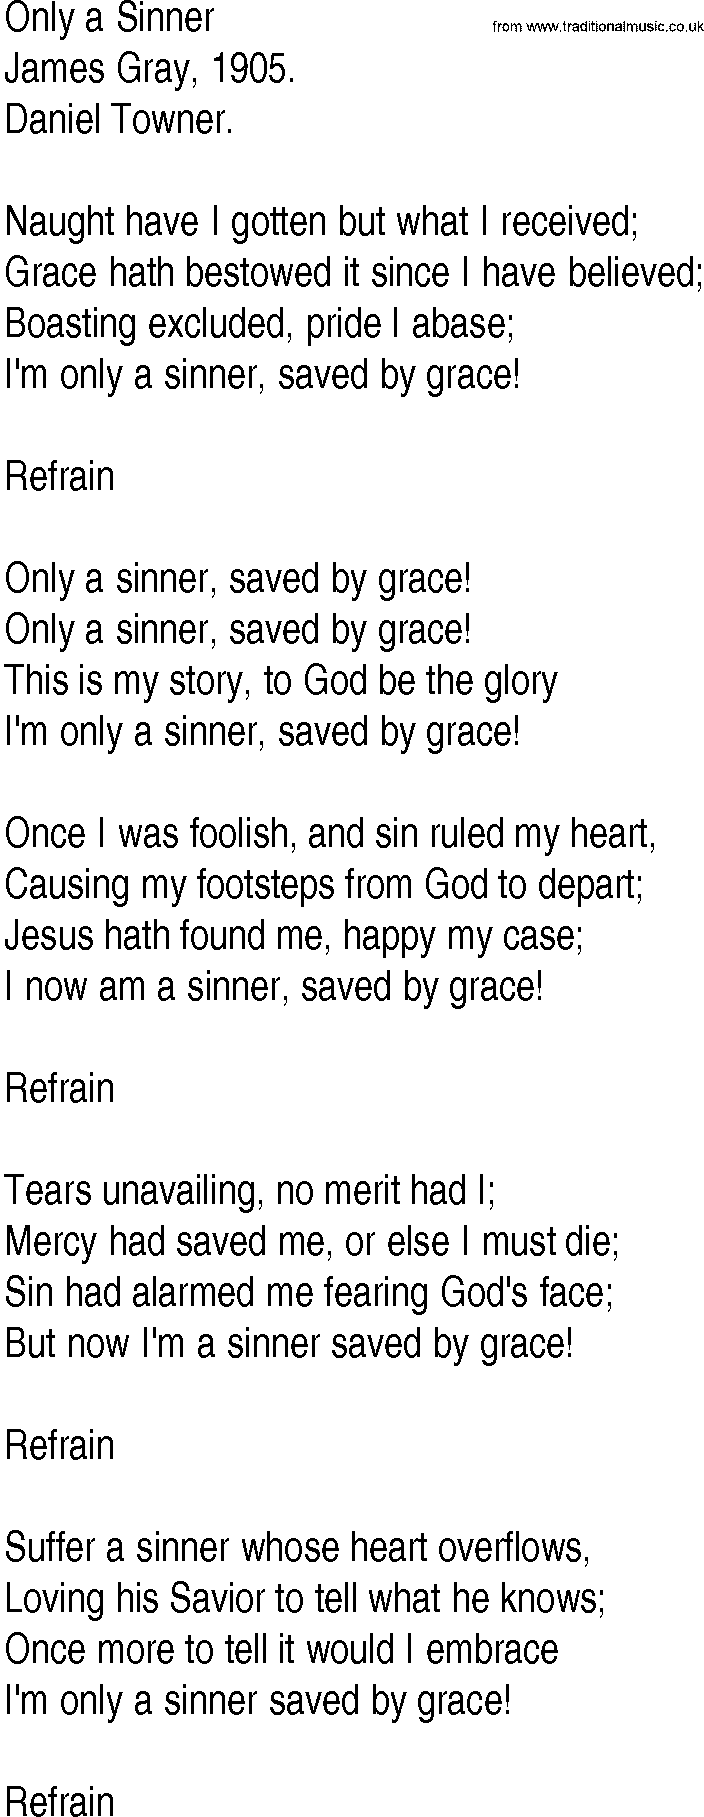 Hymn and Gospel Song: Only a Sinner by James Gray lyrics